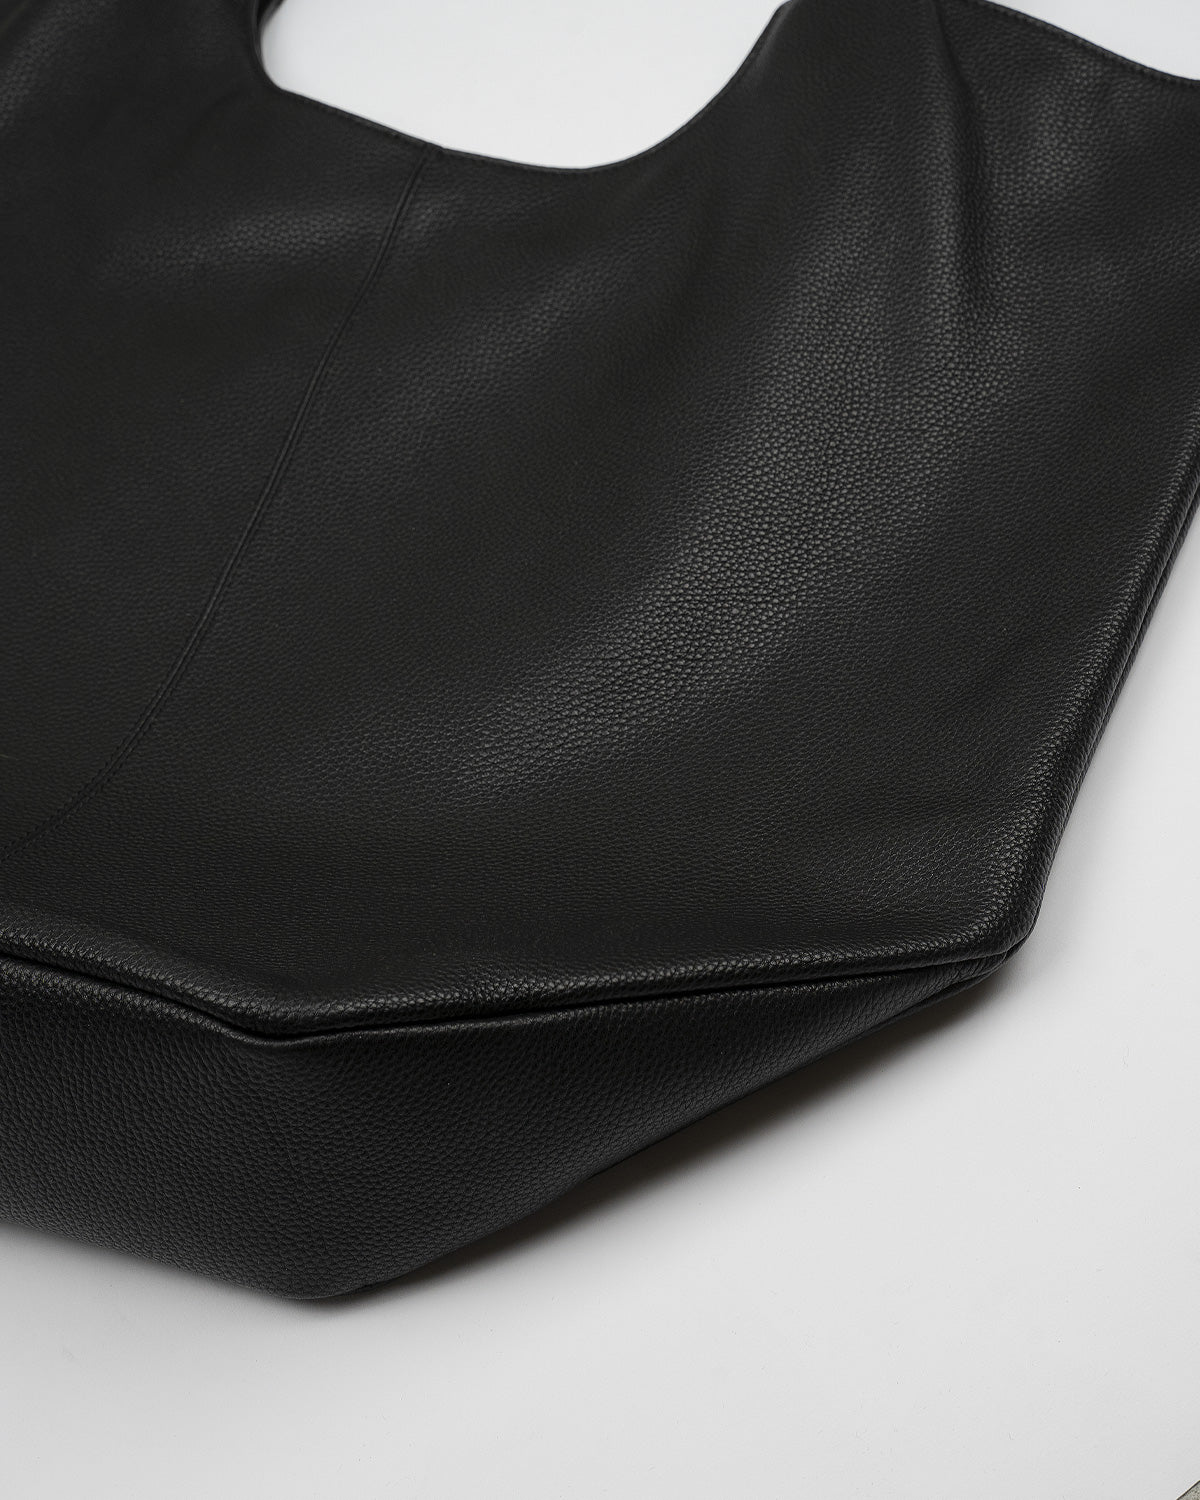 ROOT LEATHER TOTE - BLACK